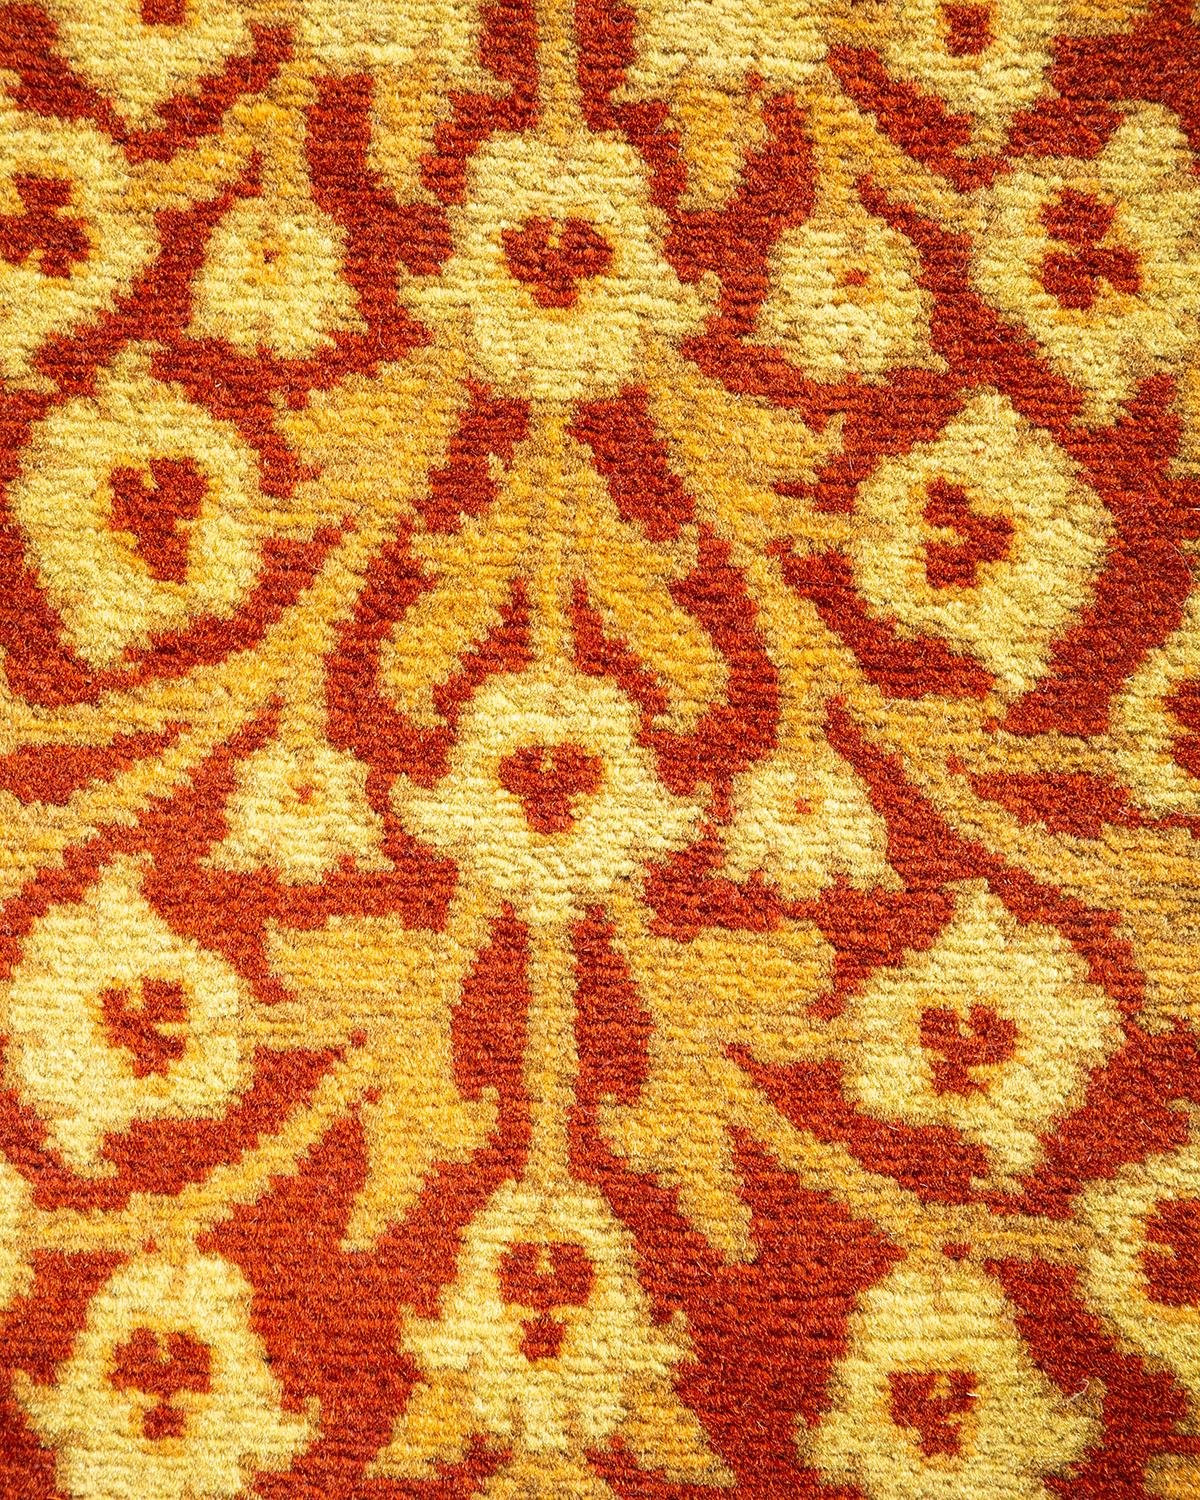 Pakistani One-of-a-Kind Mogul Traditional Hand-Knotted Runner, Orange 6' 1